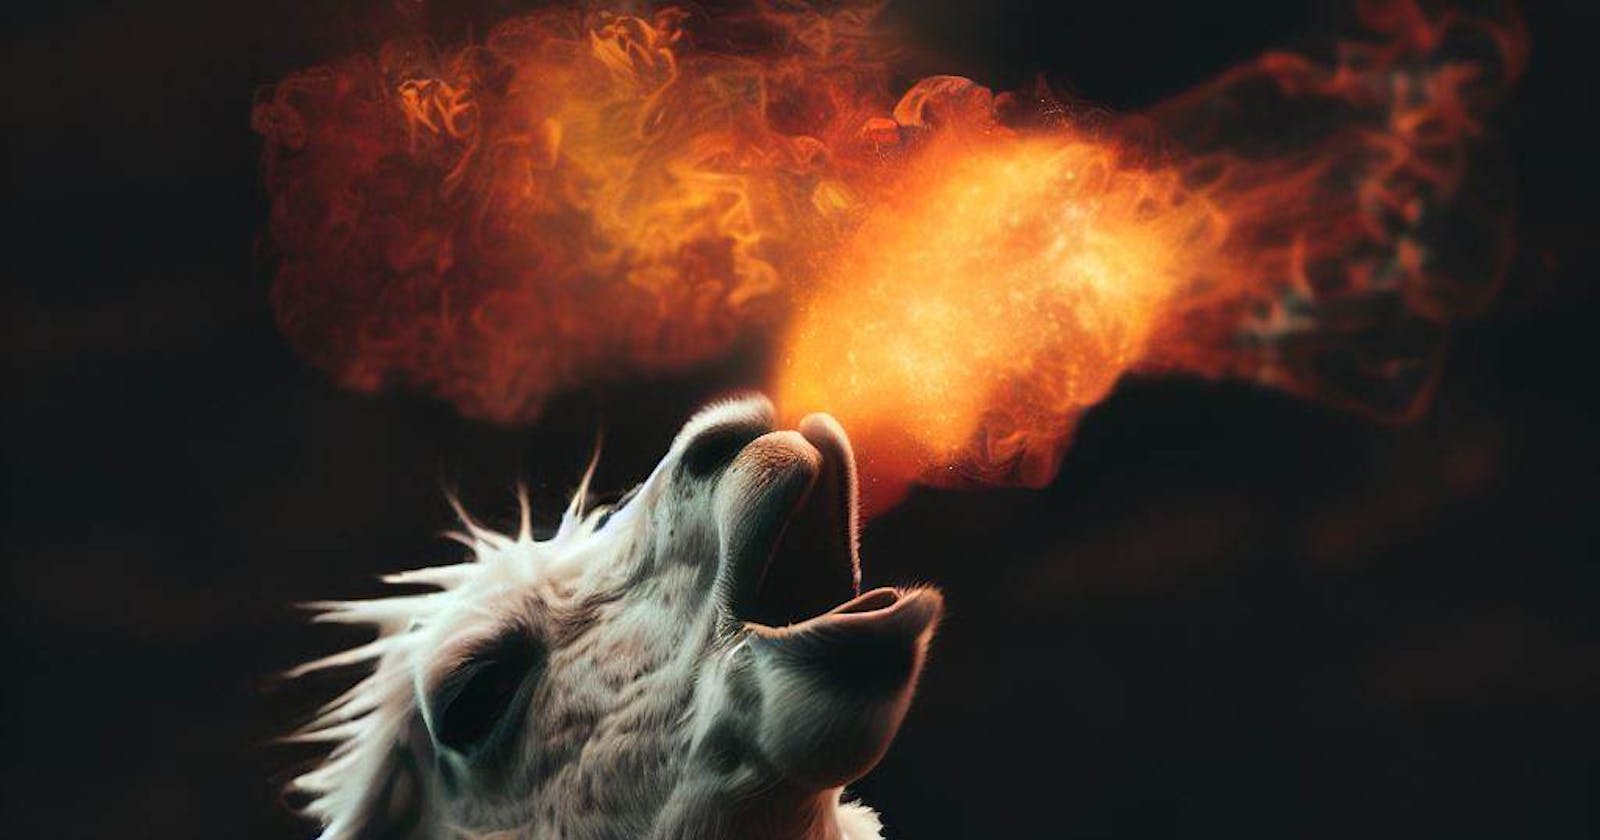 Fine-Tuning Meta's LLAMA 2 70B Model on FHIR Datasets: A Technical Overview